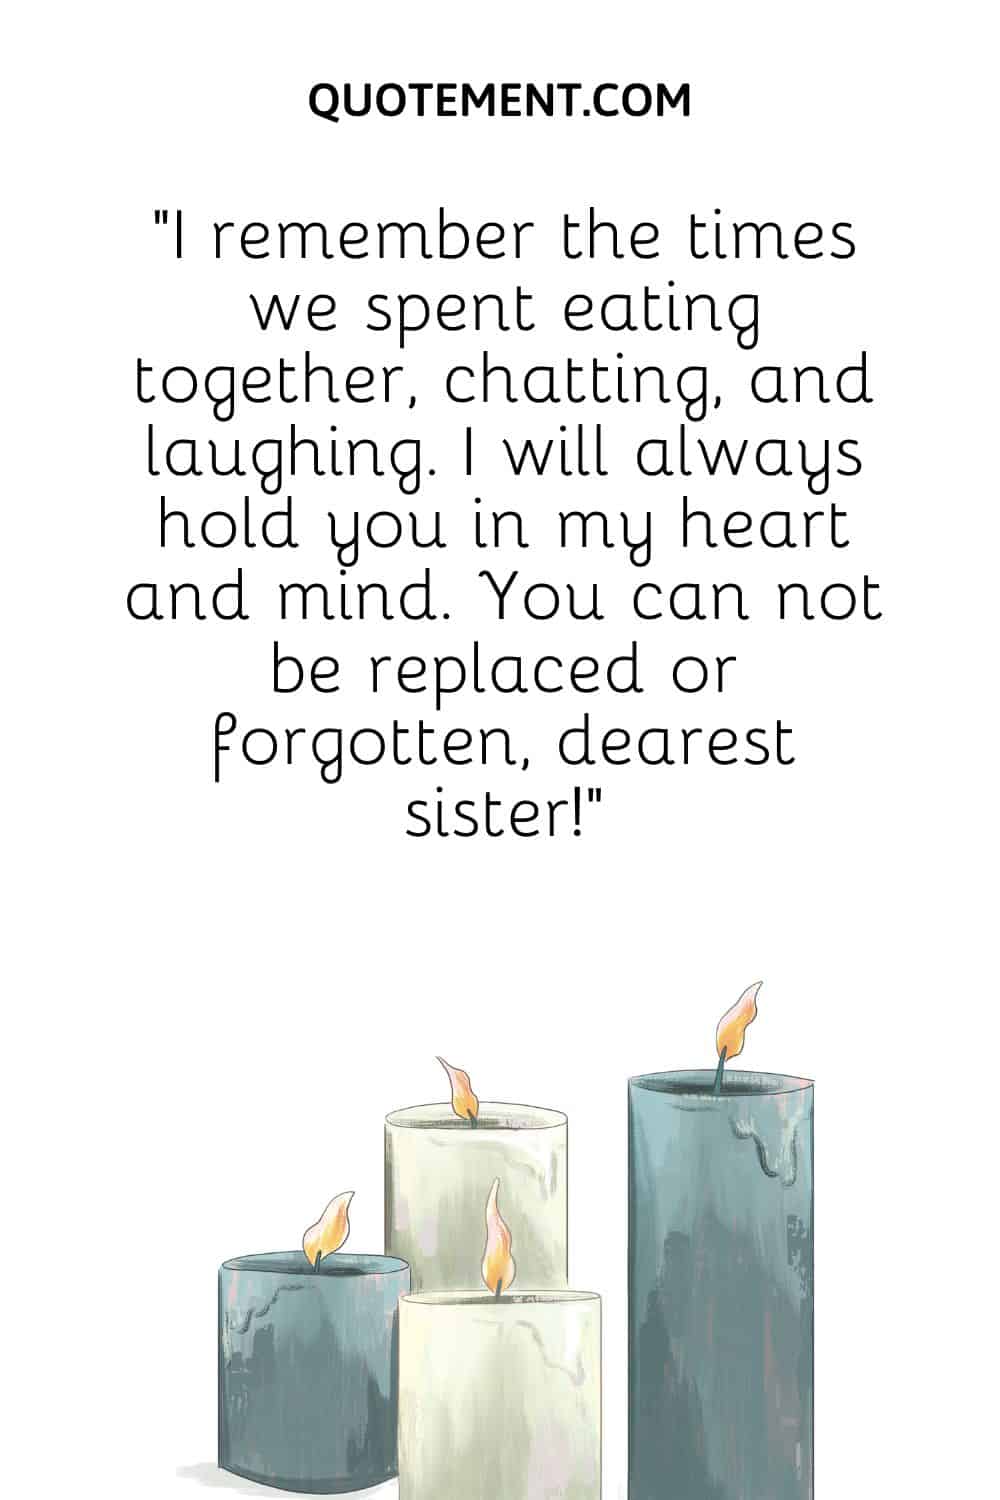 “I remember the times we spent eating together, chatting, and laughing. I will always hold you in my heart and mind. You can not be replaced or forgotten, dearest sister!”